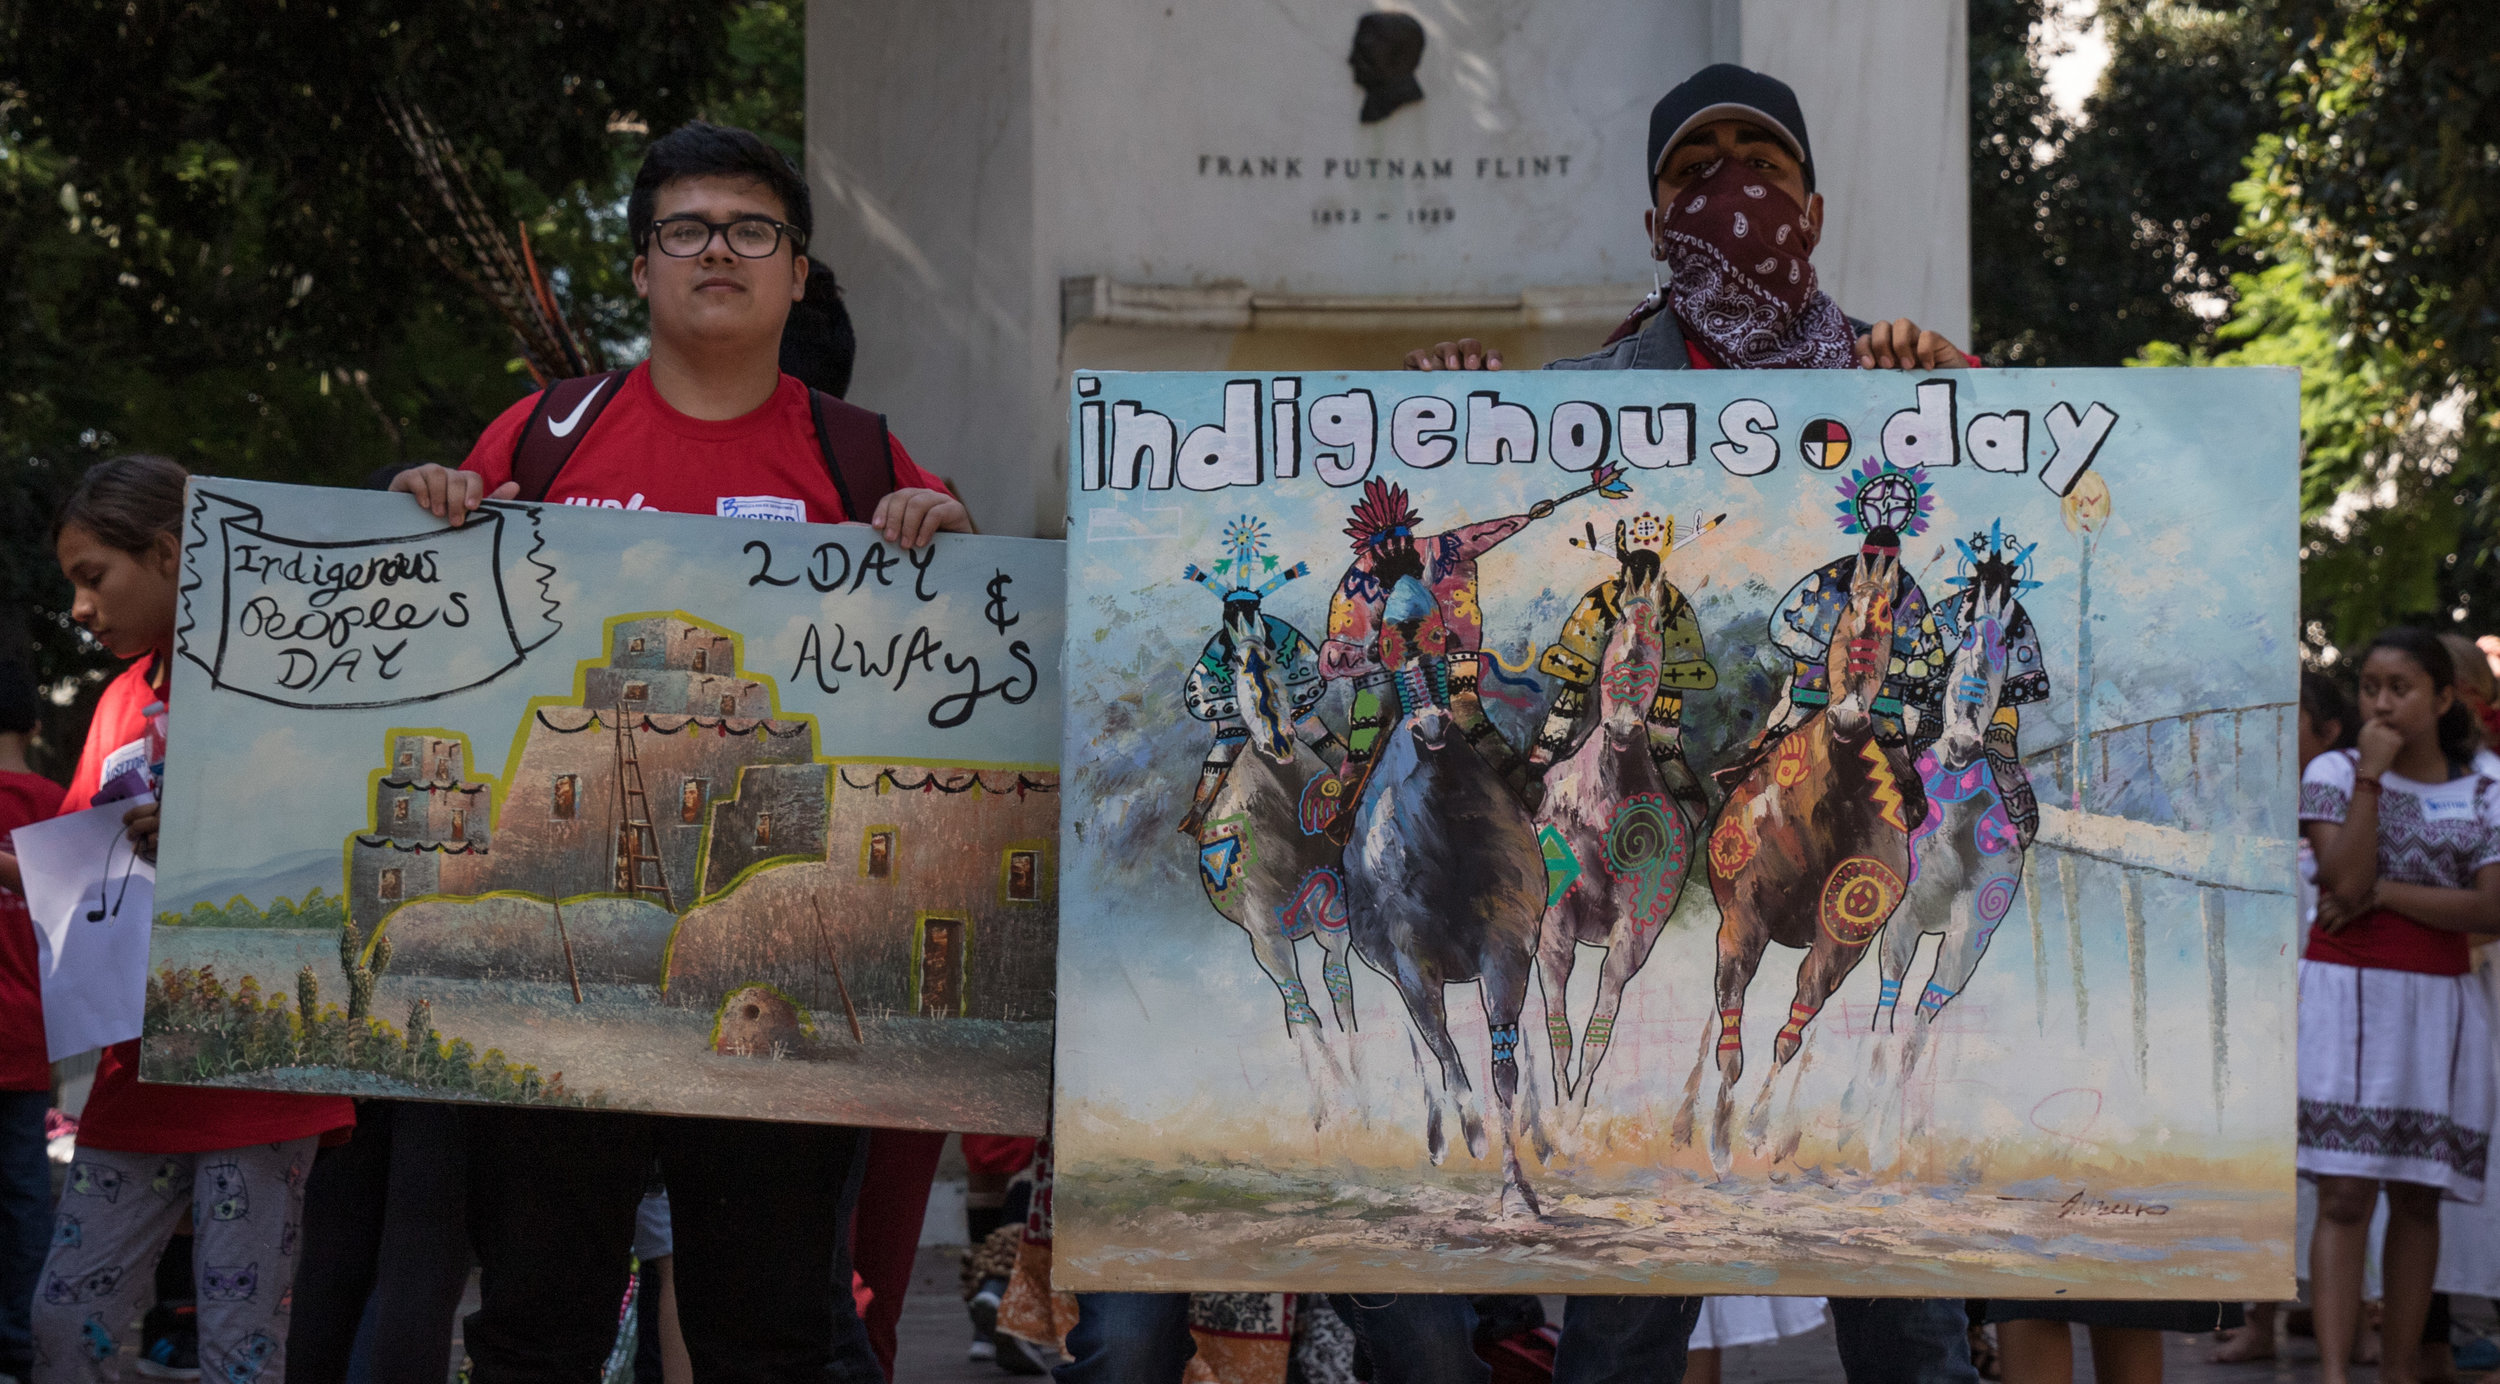  Jaime Arguelles (left) and Isaac Ramirez (right) show off their signs in support of Indigenous Peoples Day replacing Columbus Day on August 30, 2017 at Los Angeles City Hall in Los Angeles California (Photo By: Zane Meyer-Thornton) 